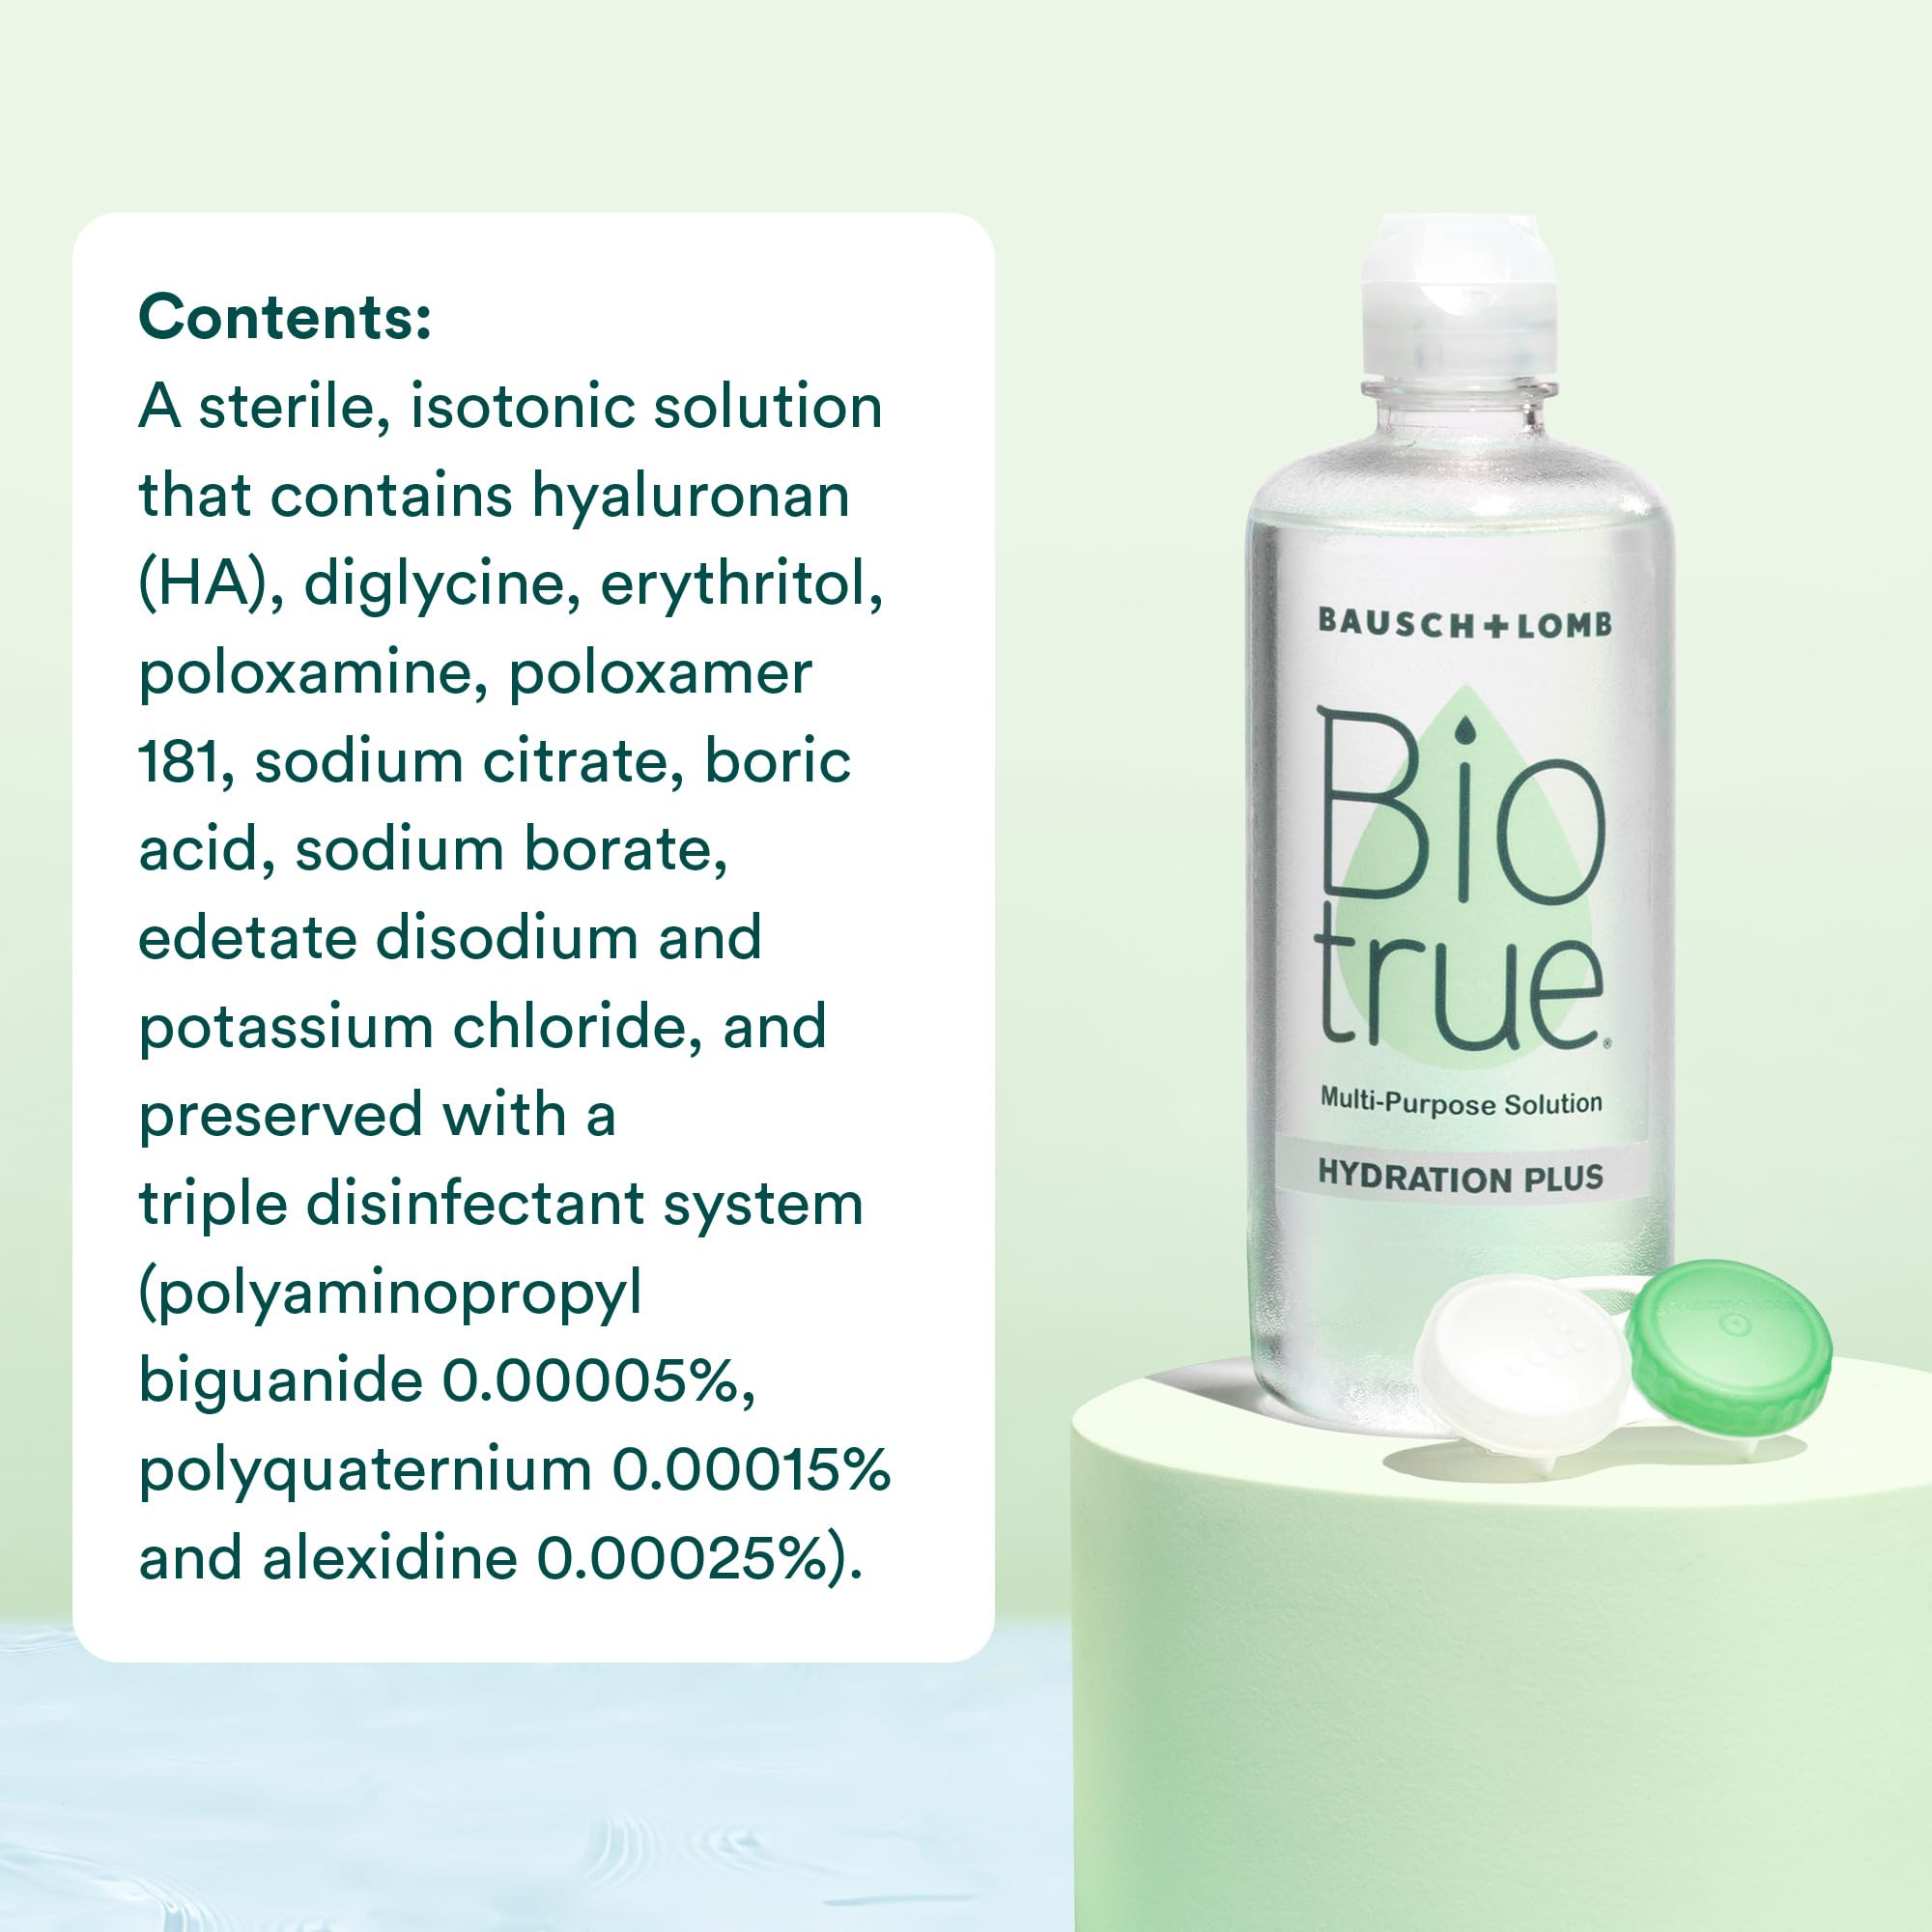 Biotrue Hydration Plus Contact Lens Solution, Multi-Purpose Solution for Soft Contact Lenses, Lens Case Included, 4 FL OZ